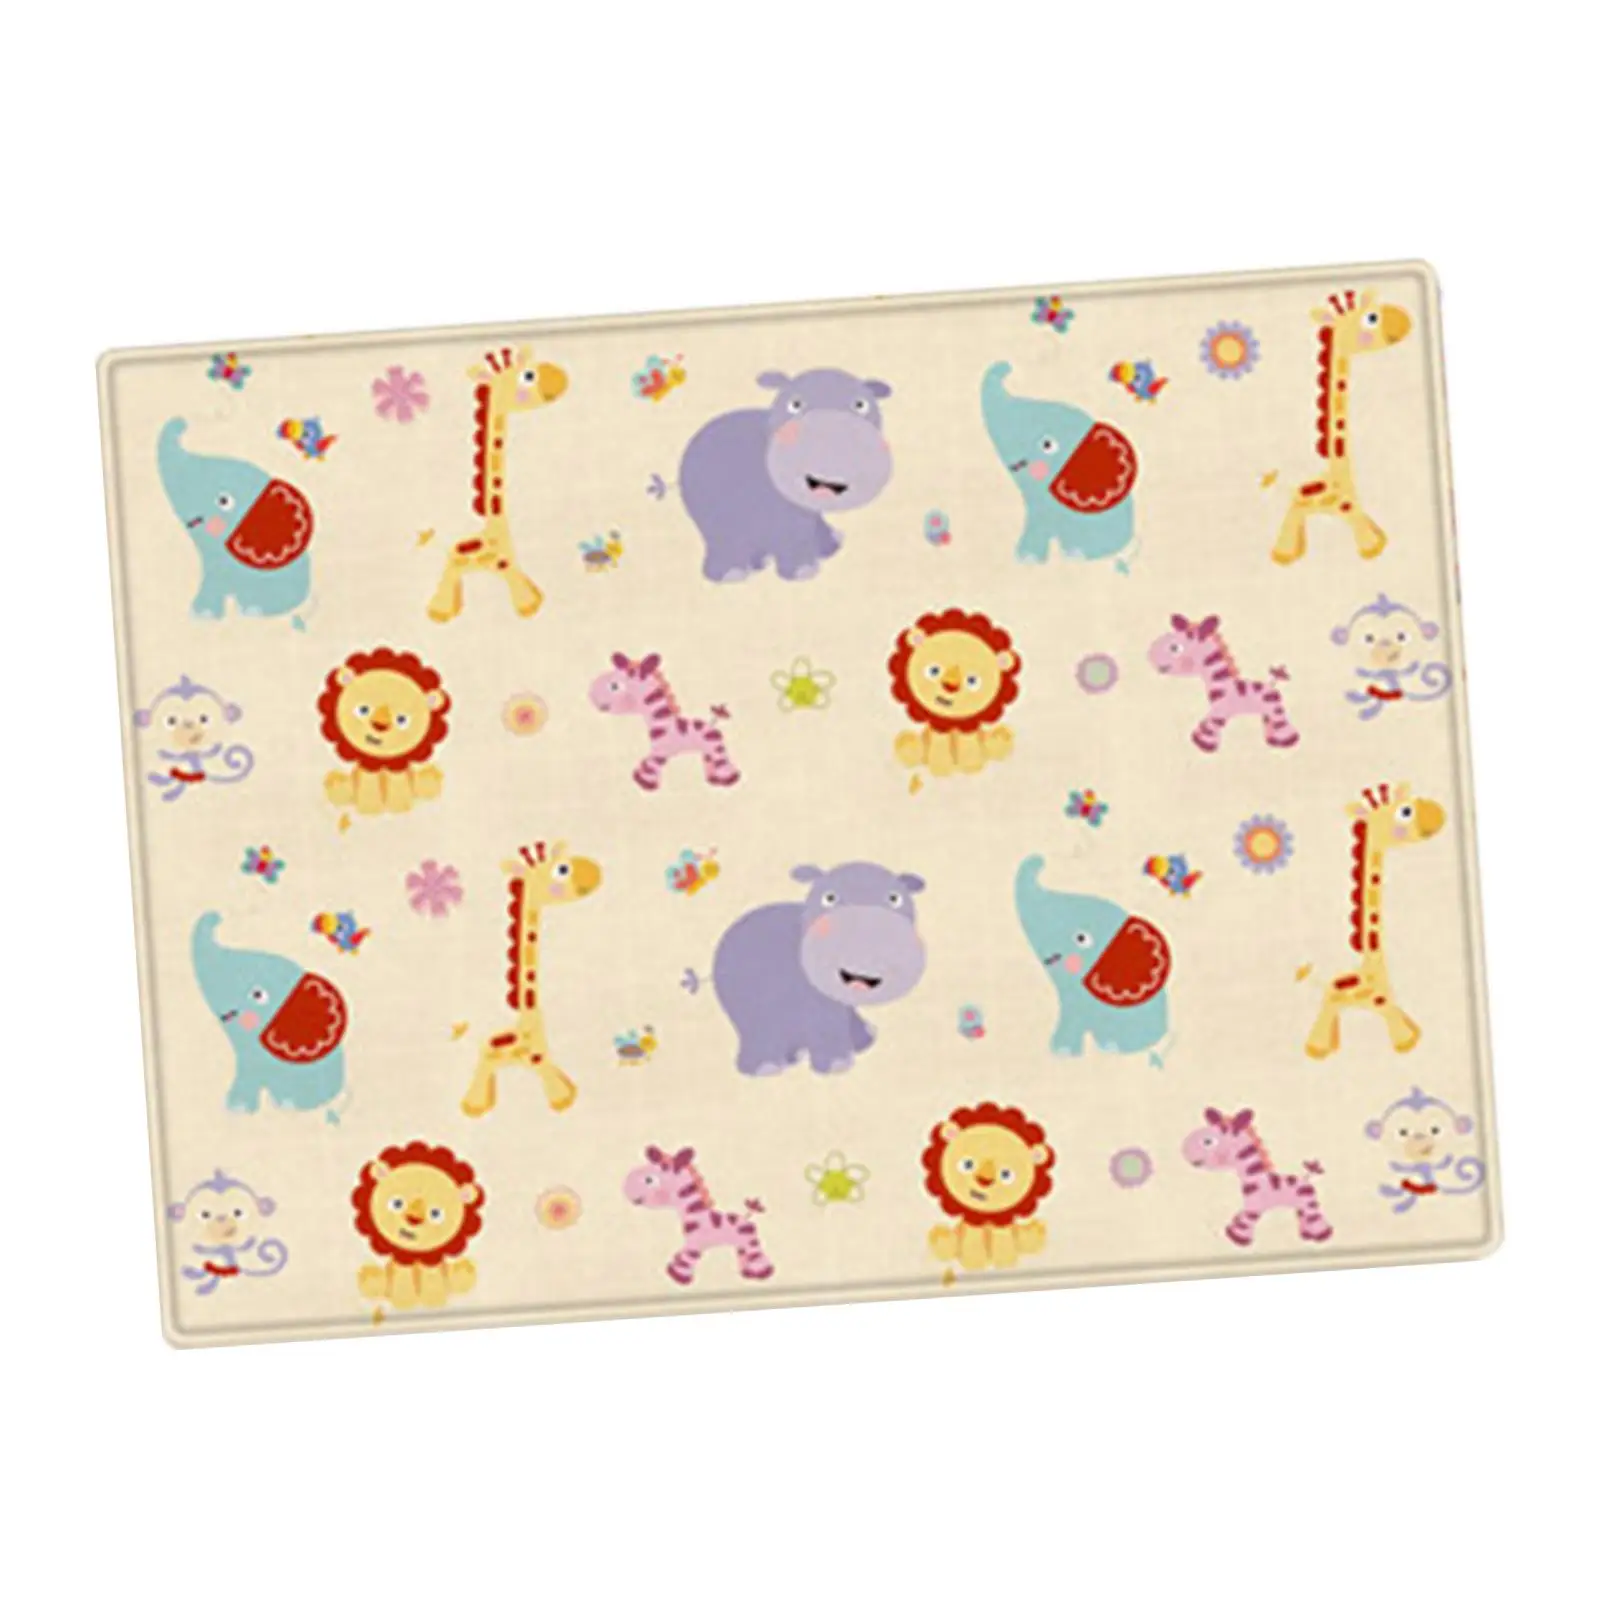 Folding Puzzle Mat Playmat Anti Slip Baby Play Mat for Infant Kids Playroom